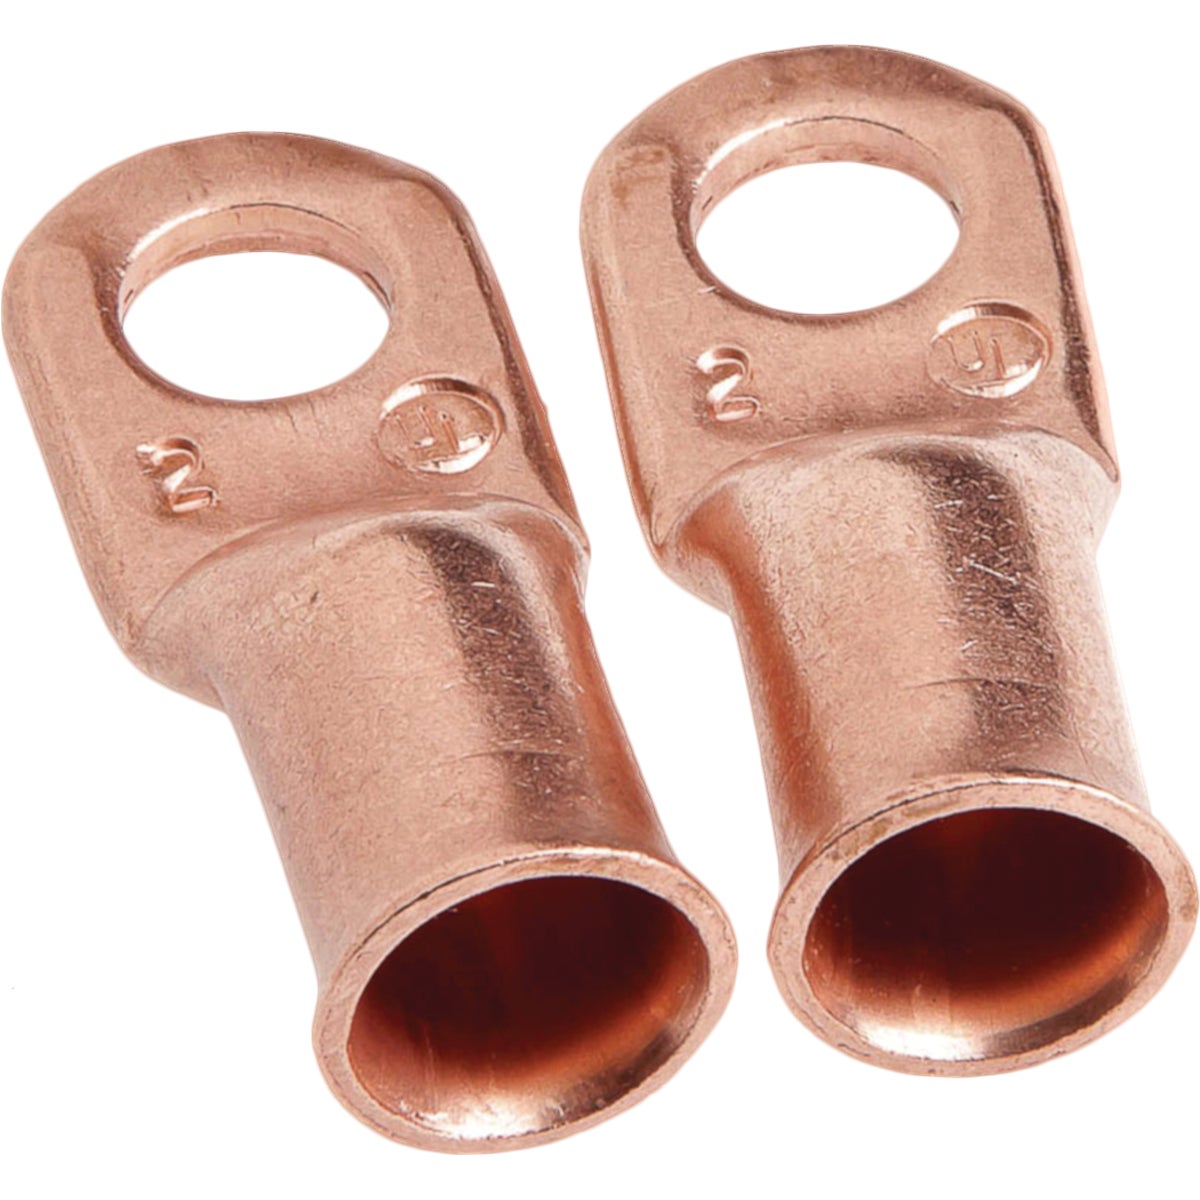 Forney #2 Cable x 5/16 In. Stud Copper Cable Lug (2-Pack)